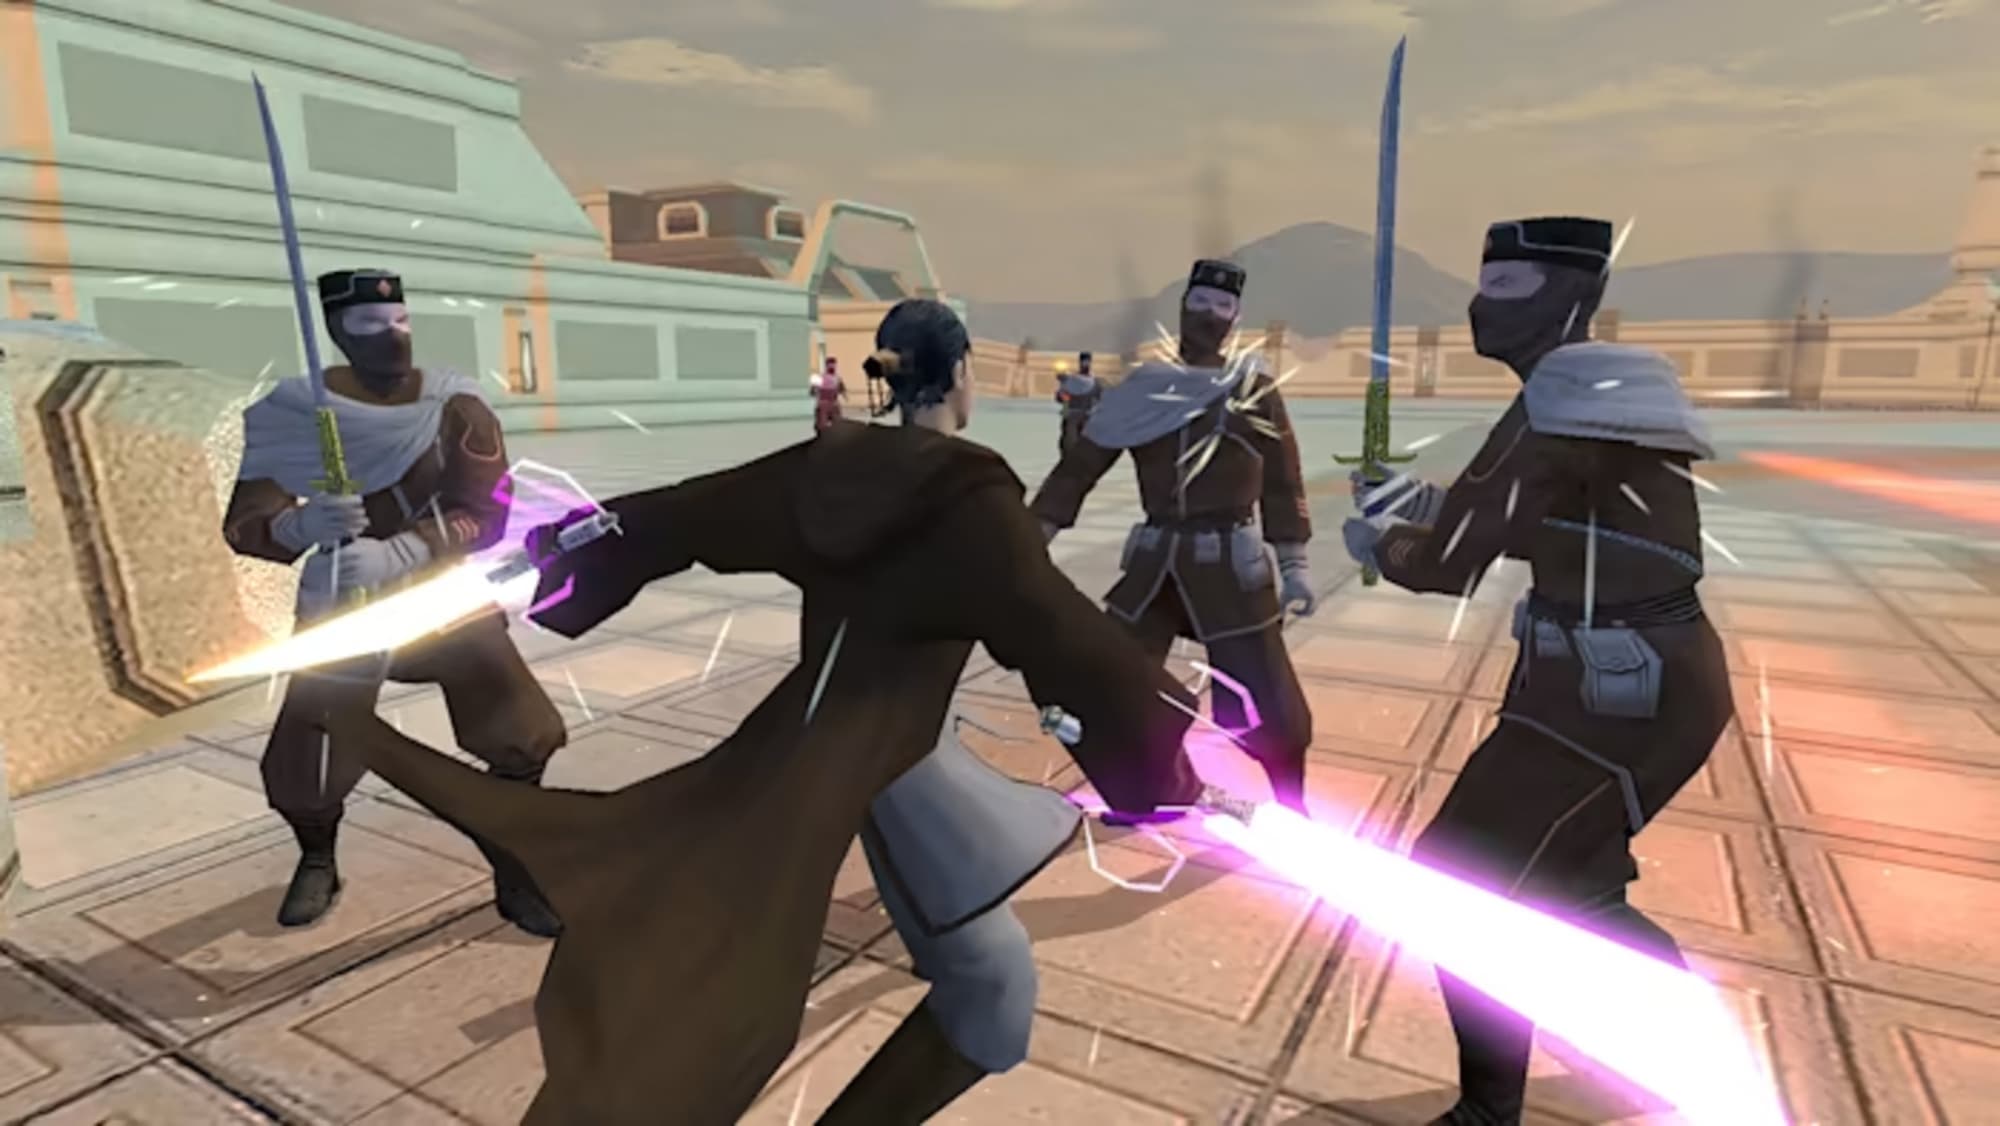 Aspyr admits Star Wars: Knights of the Old Republic II is unbeatable on Switch, then makes bizarre choice